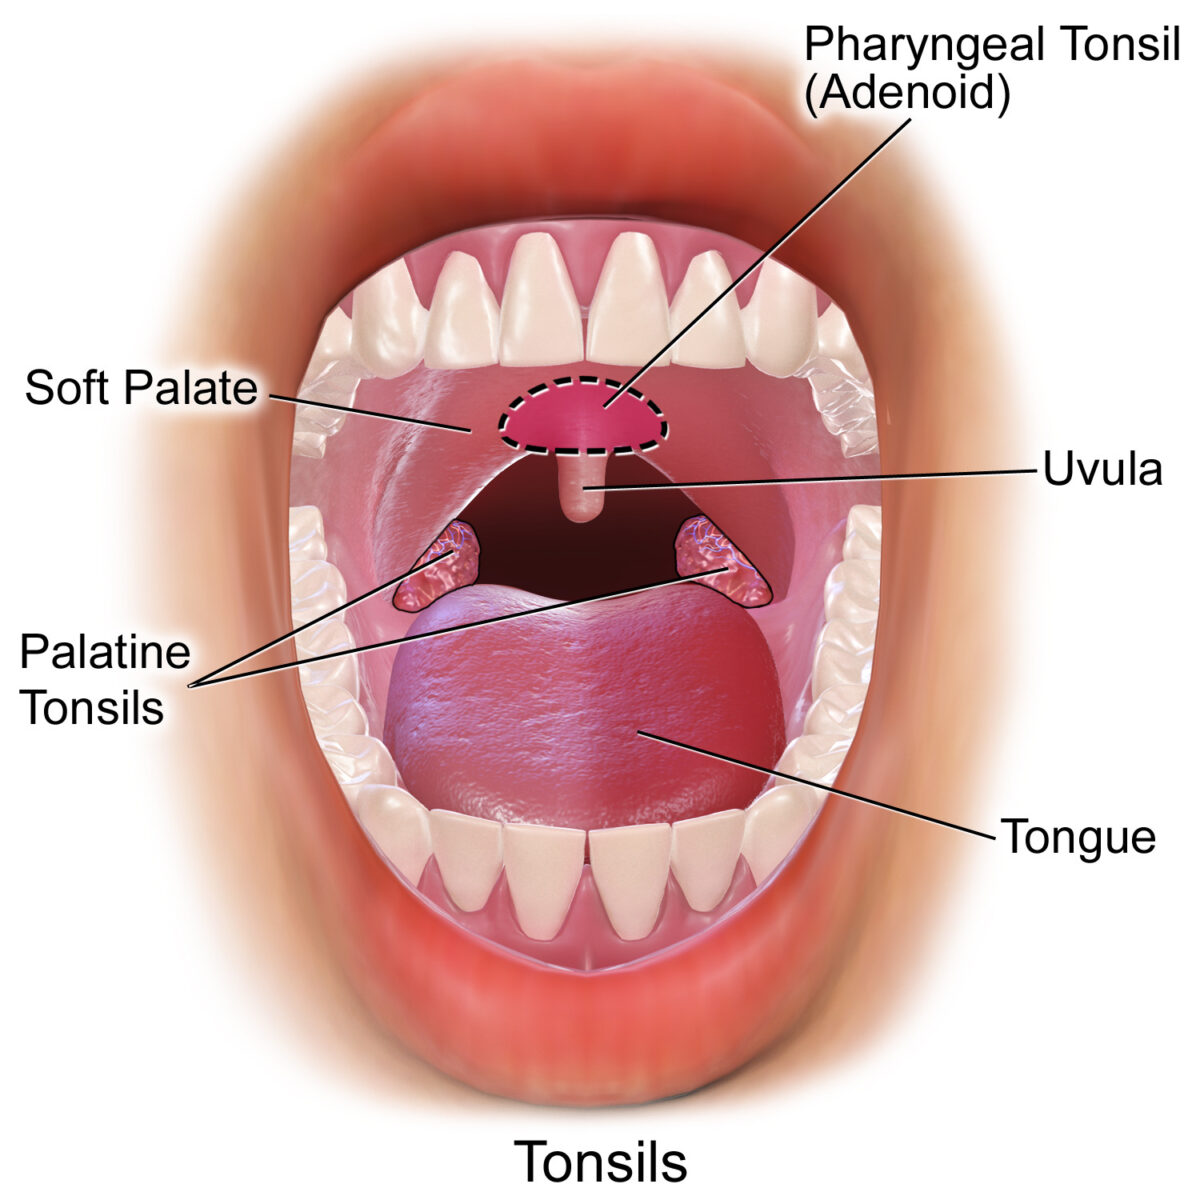 Tonsils in the oropharyngeal area